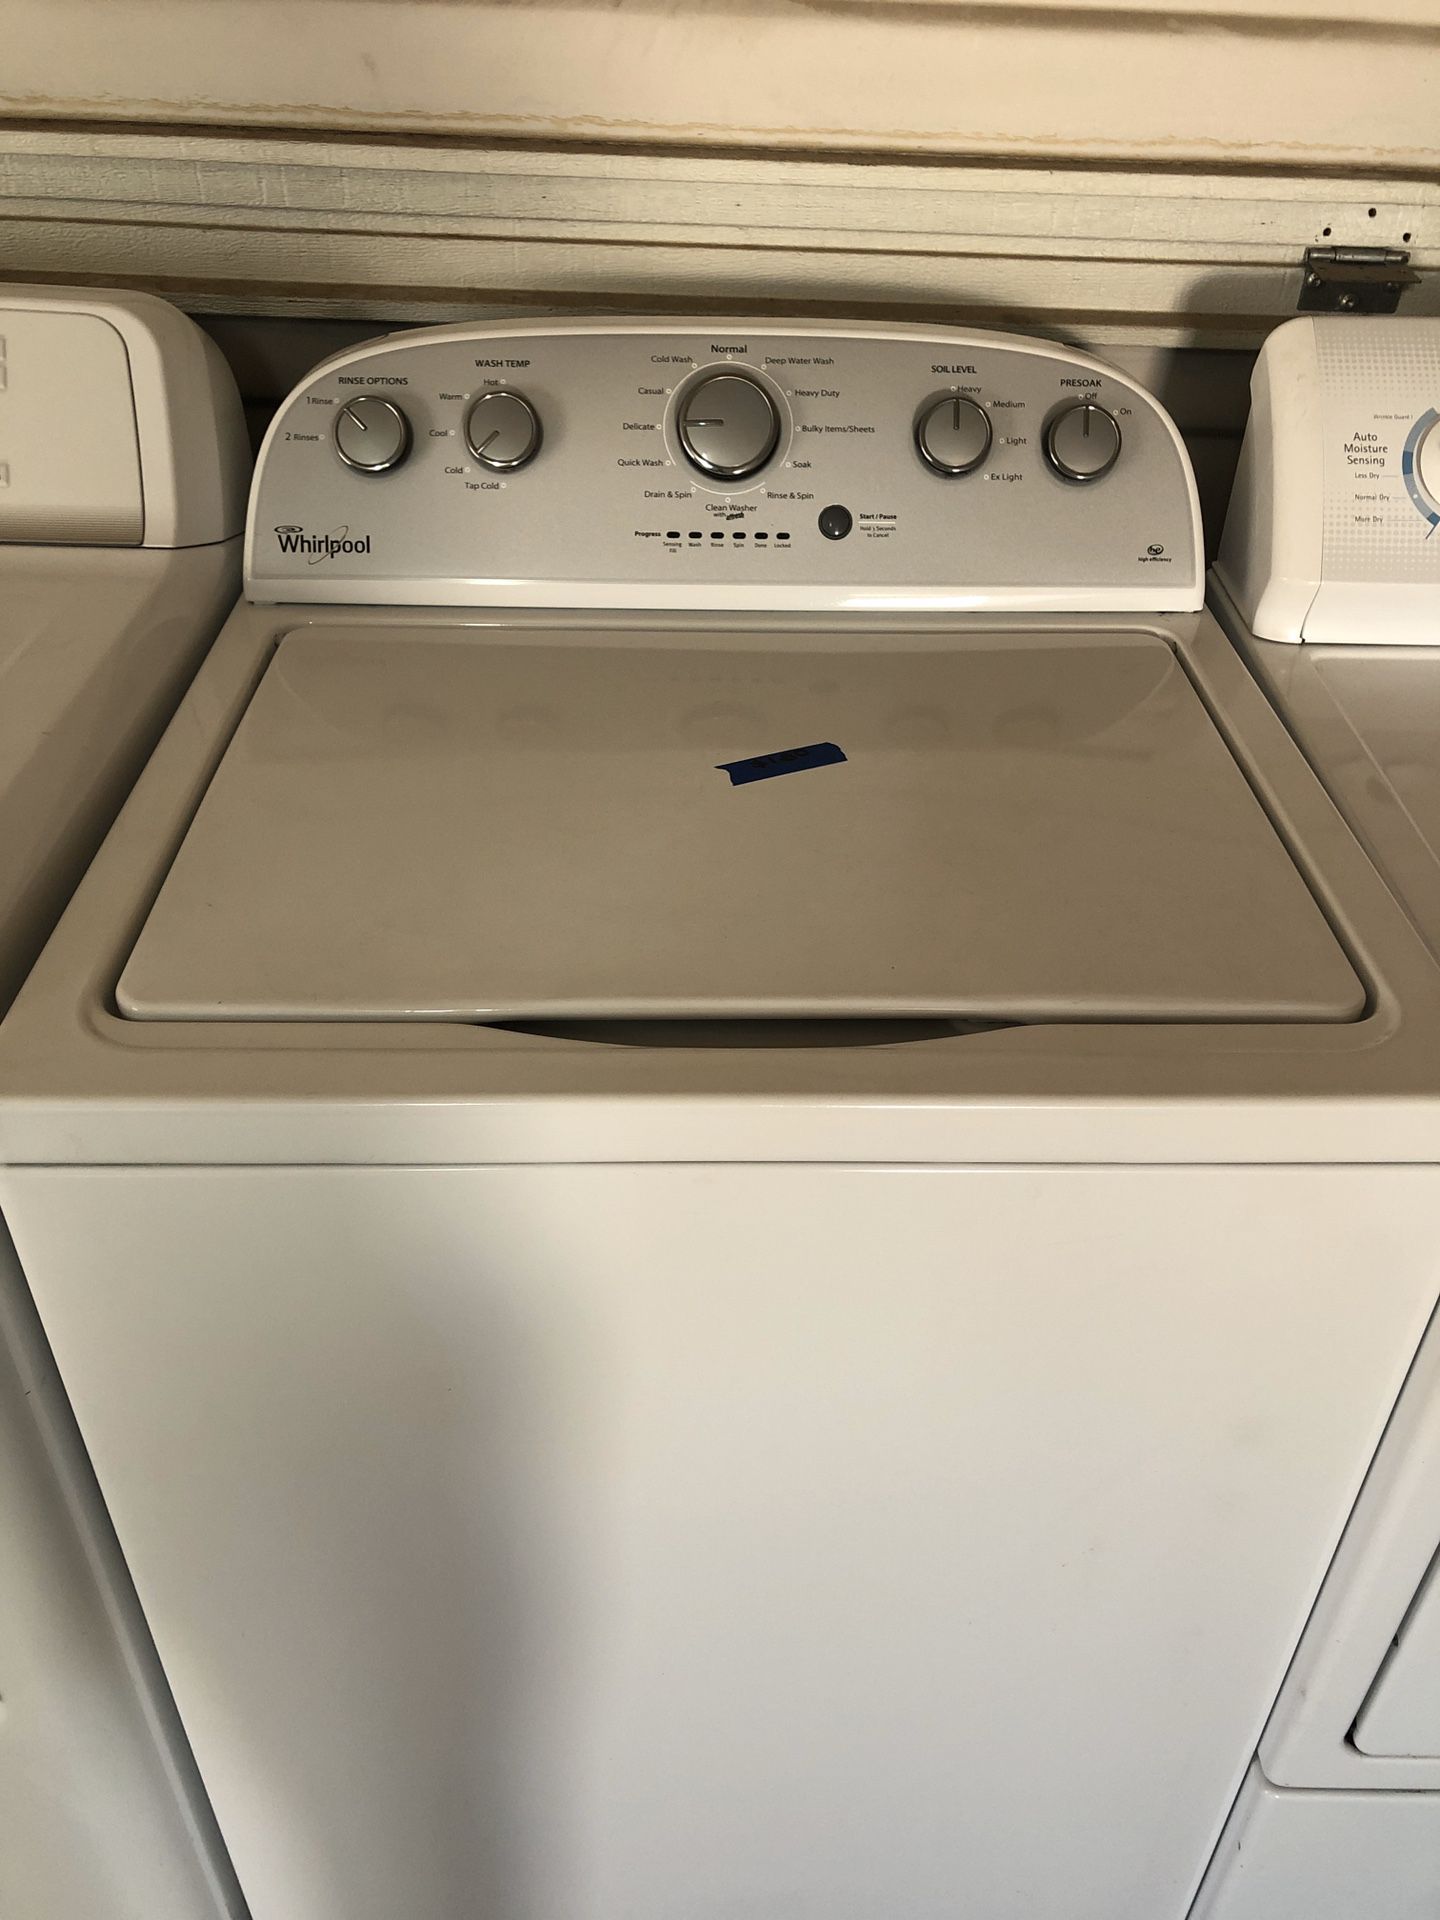 Washer whirlpool super capacity plus whit warranty delivery available $185